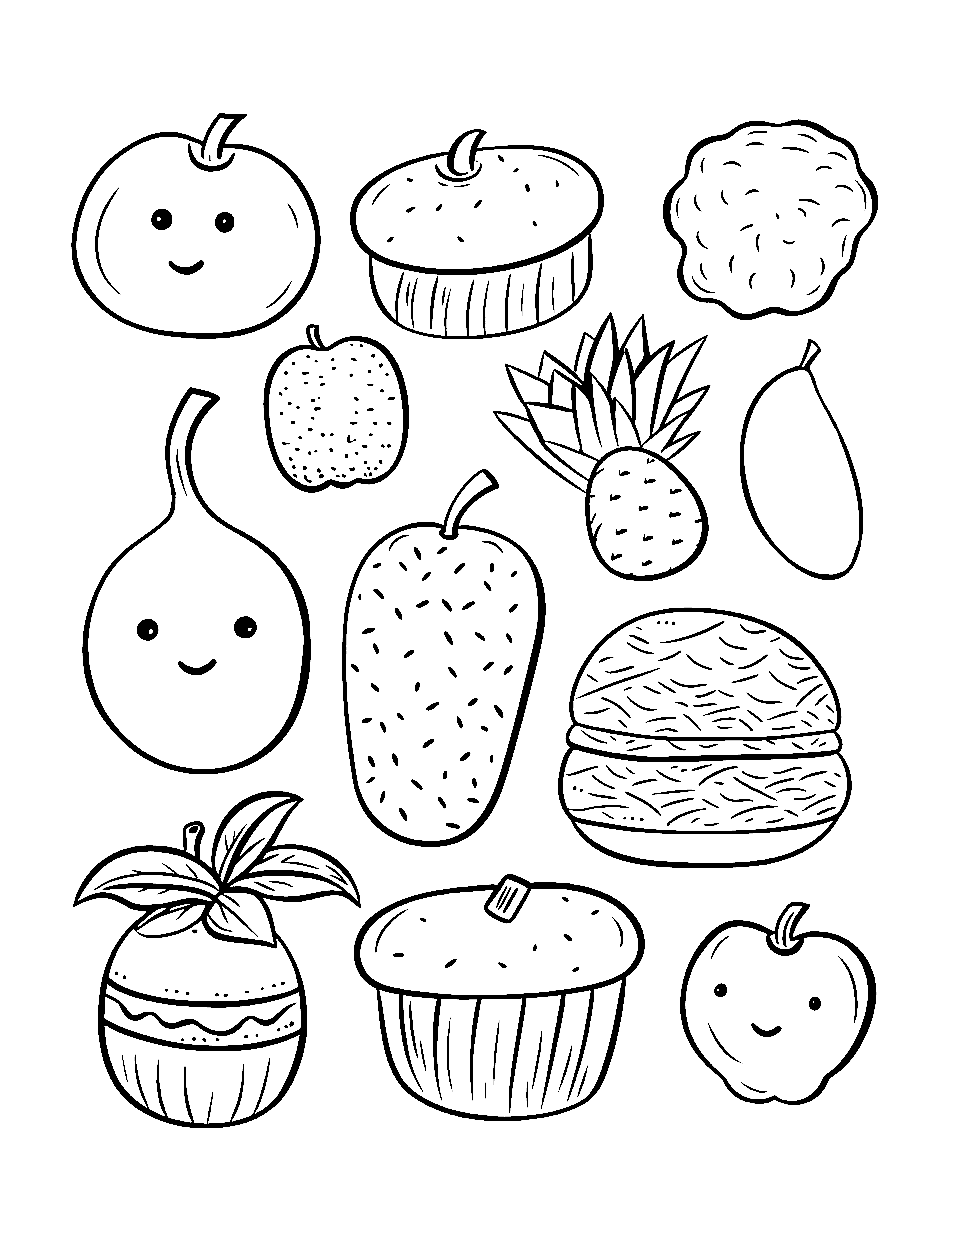 Food Clipart Collage Coloring Page - Simple clipart images of fruits, and veggies.